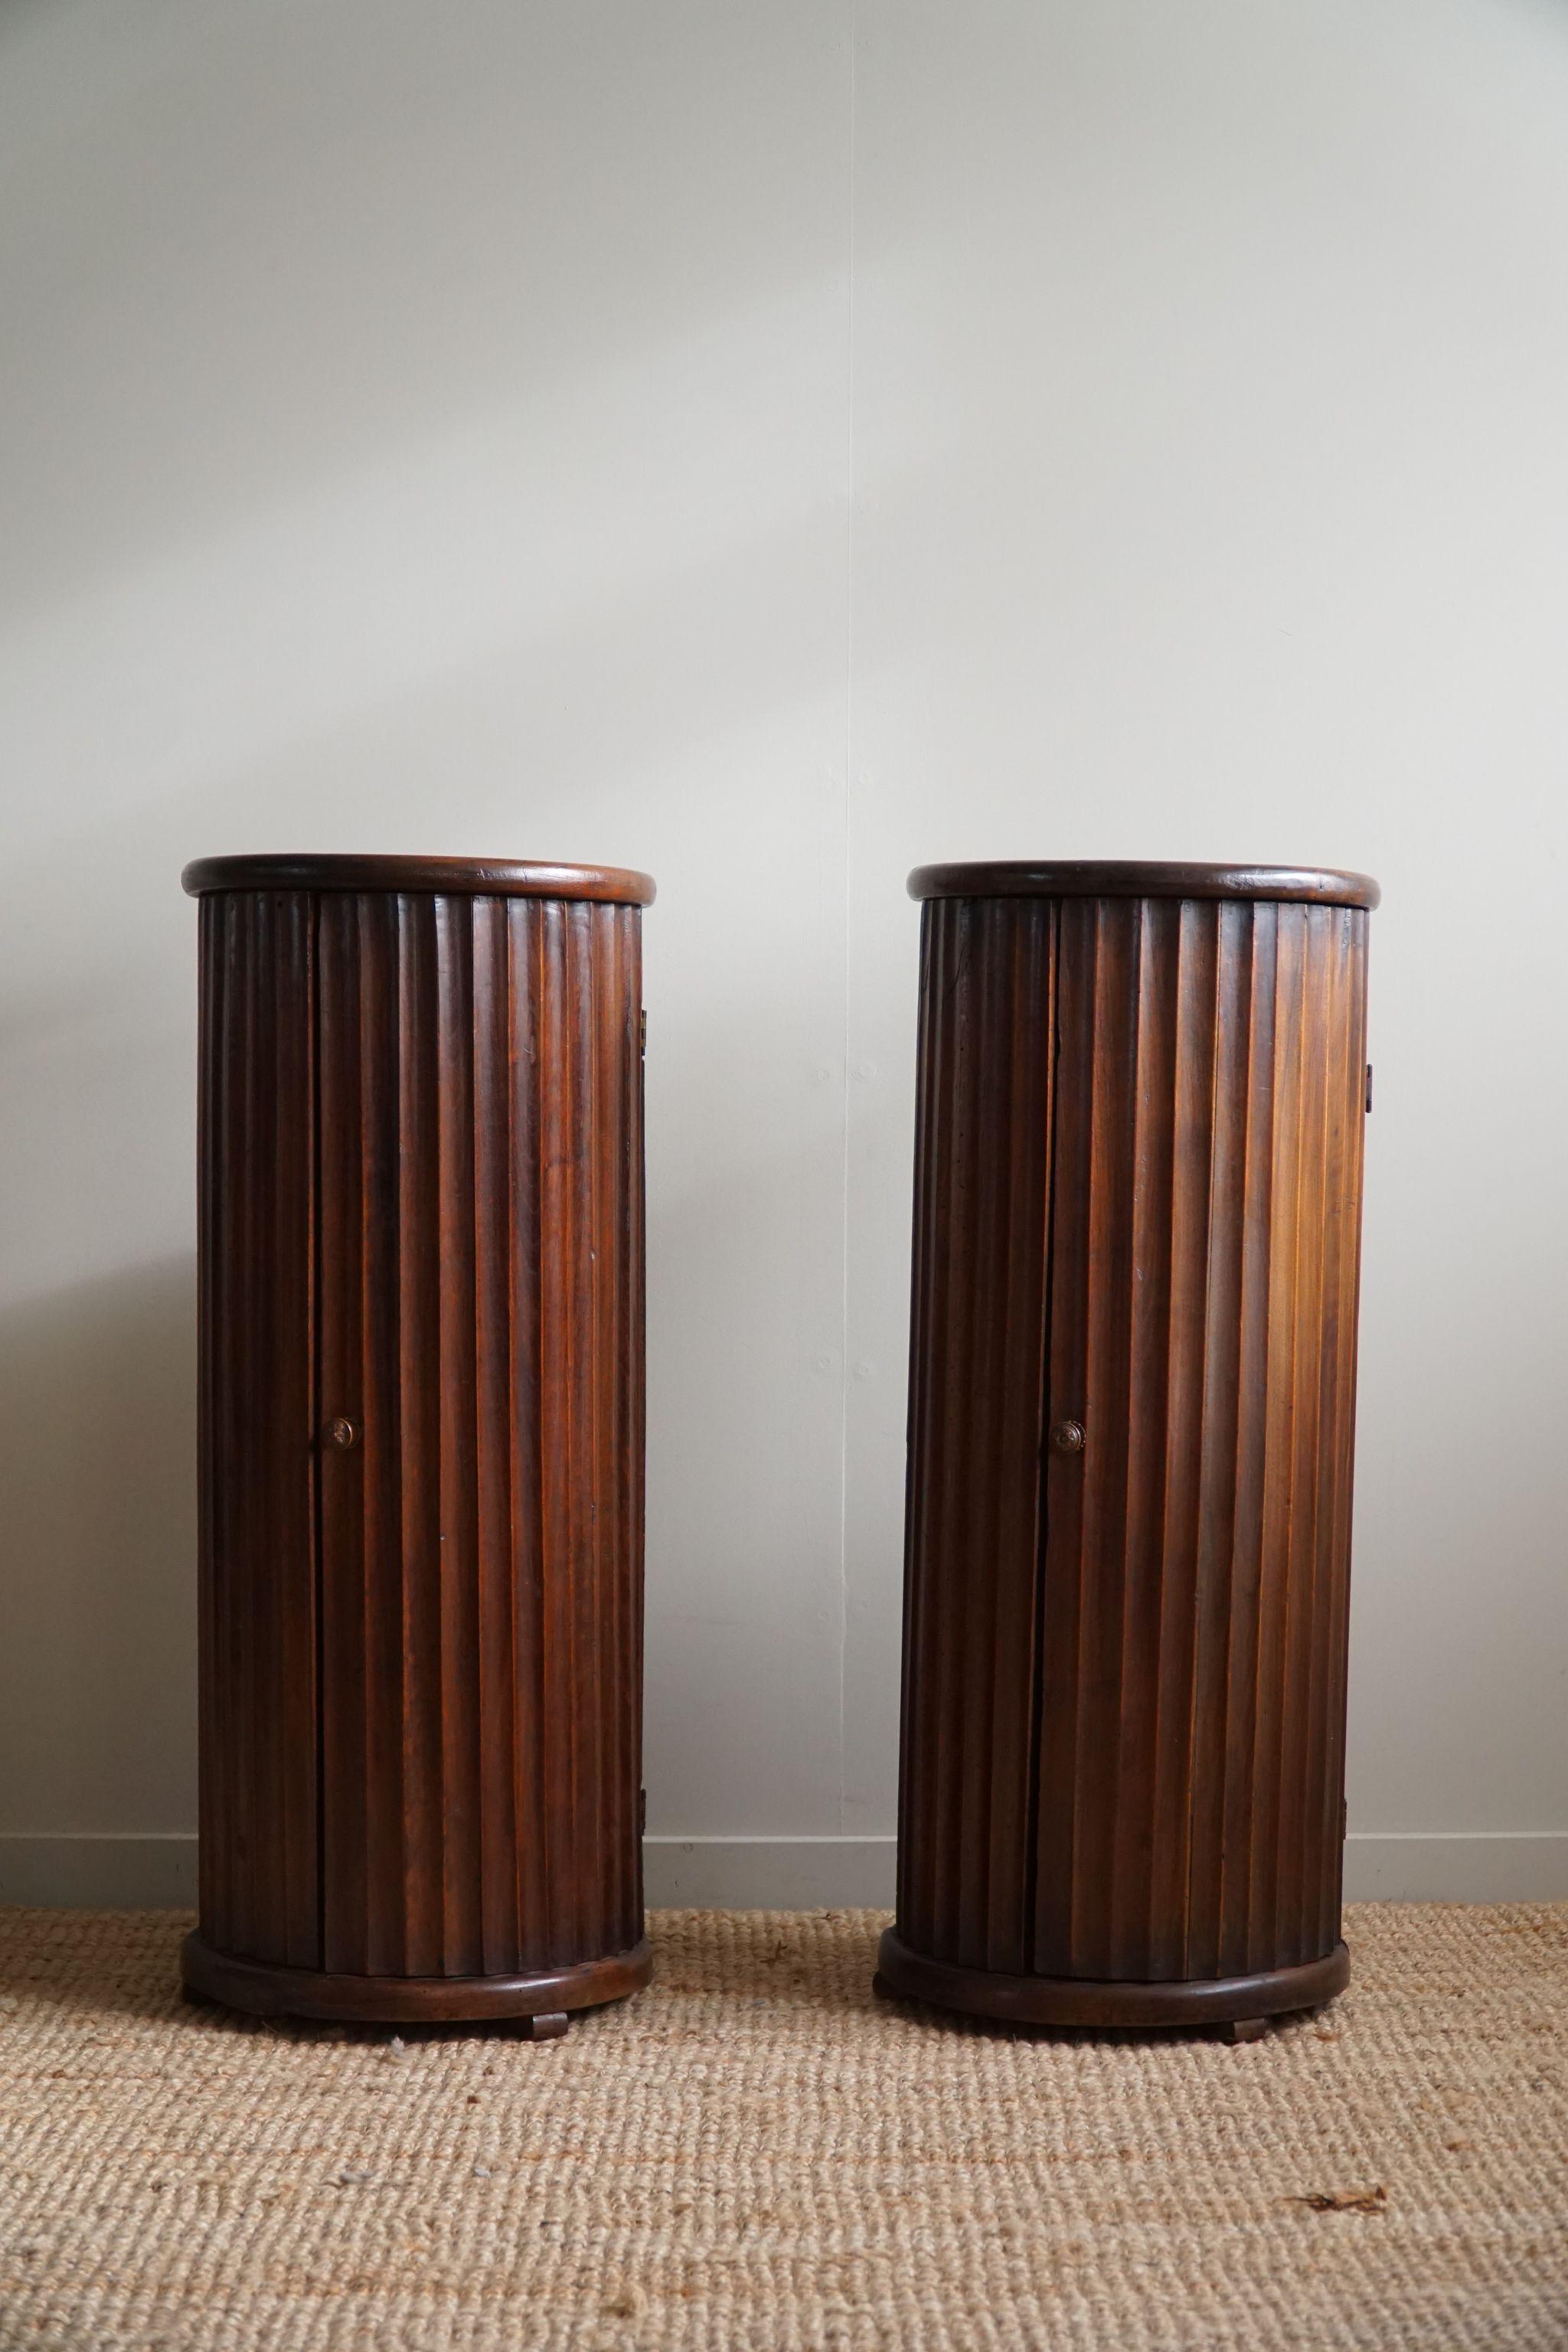 A Pair of Antique Pedestals With Storage, Nutwood, Italian Cabinetmaker, 1880s  11